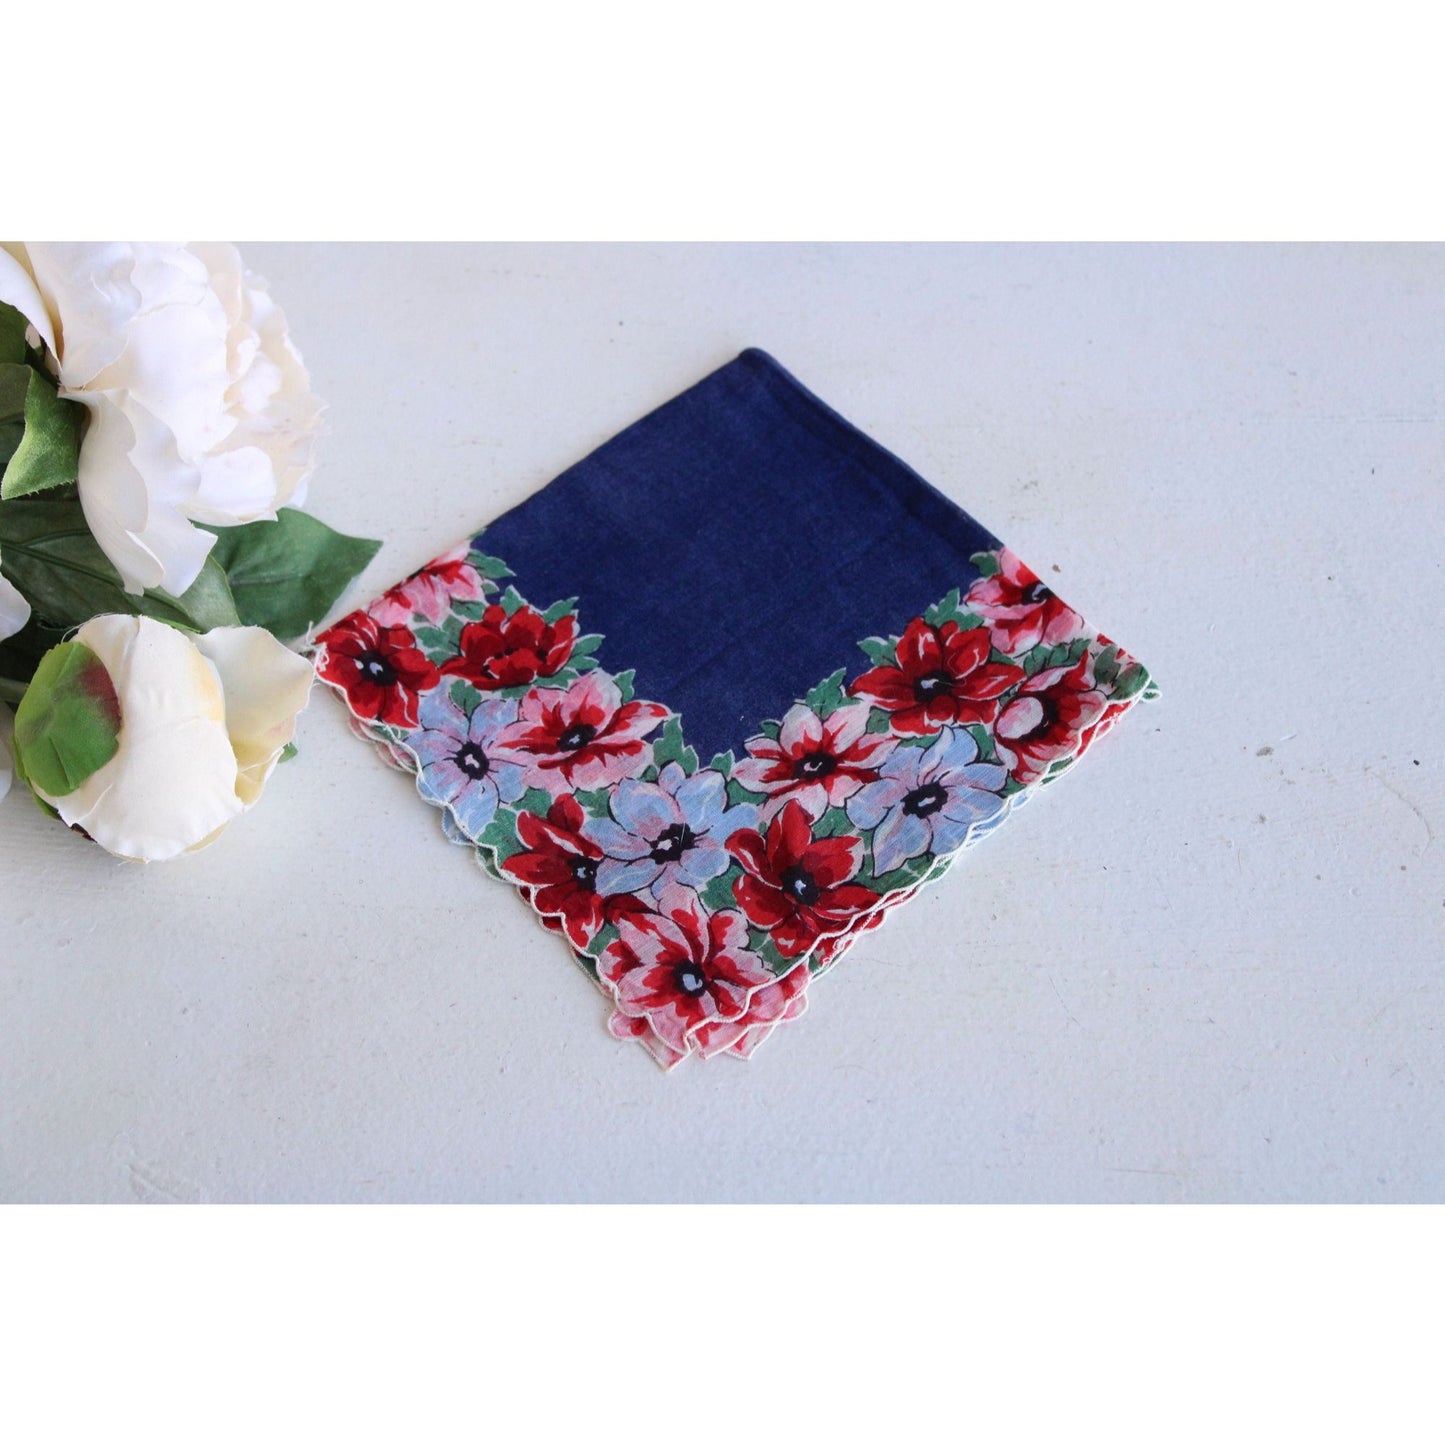 Vintage Navy Blue Cotton With Red Floral Print Hankie